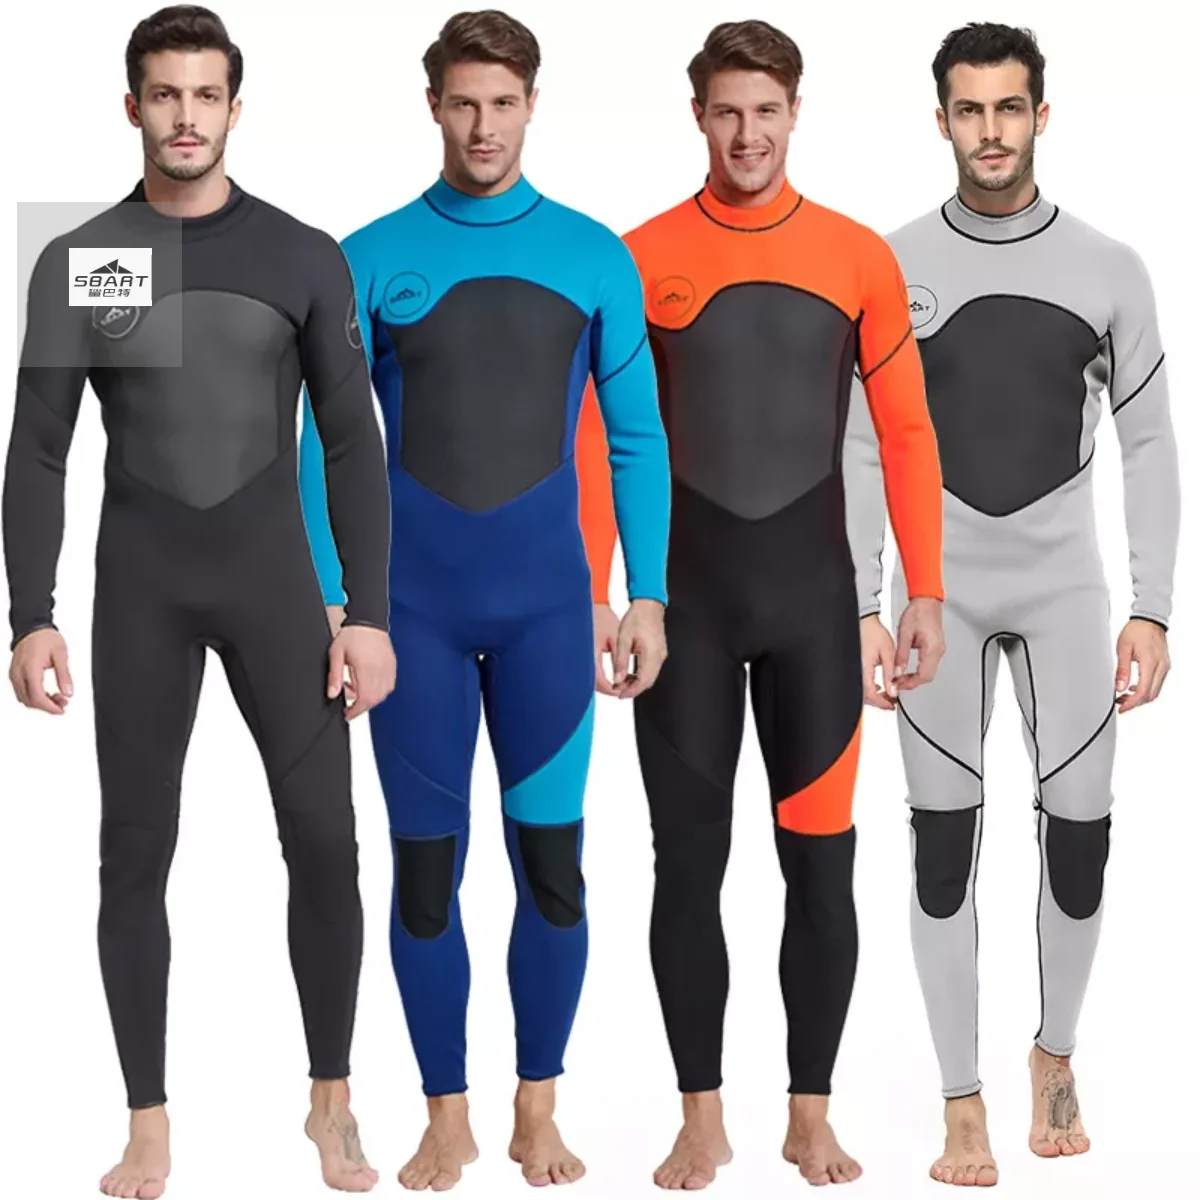 Sporting Goods Water Sports Men Details about Sbart Neopreno 3mm Diving ...